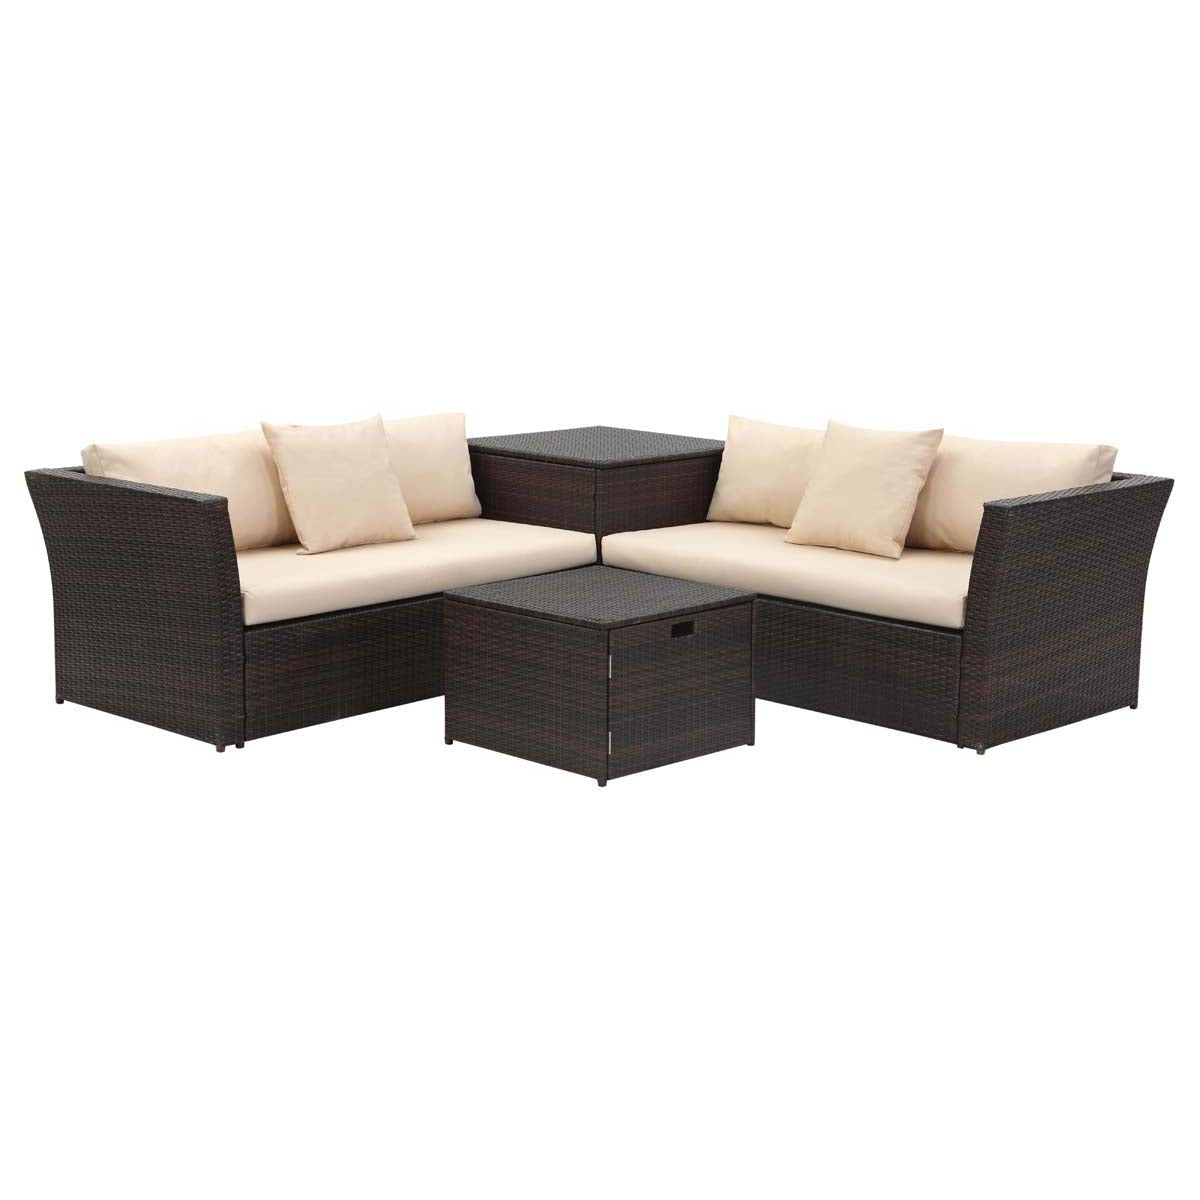 Safavieh Welch Outdoor Living Sectional Set With Storage , PAT2513